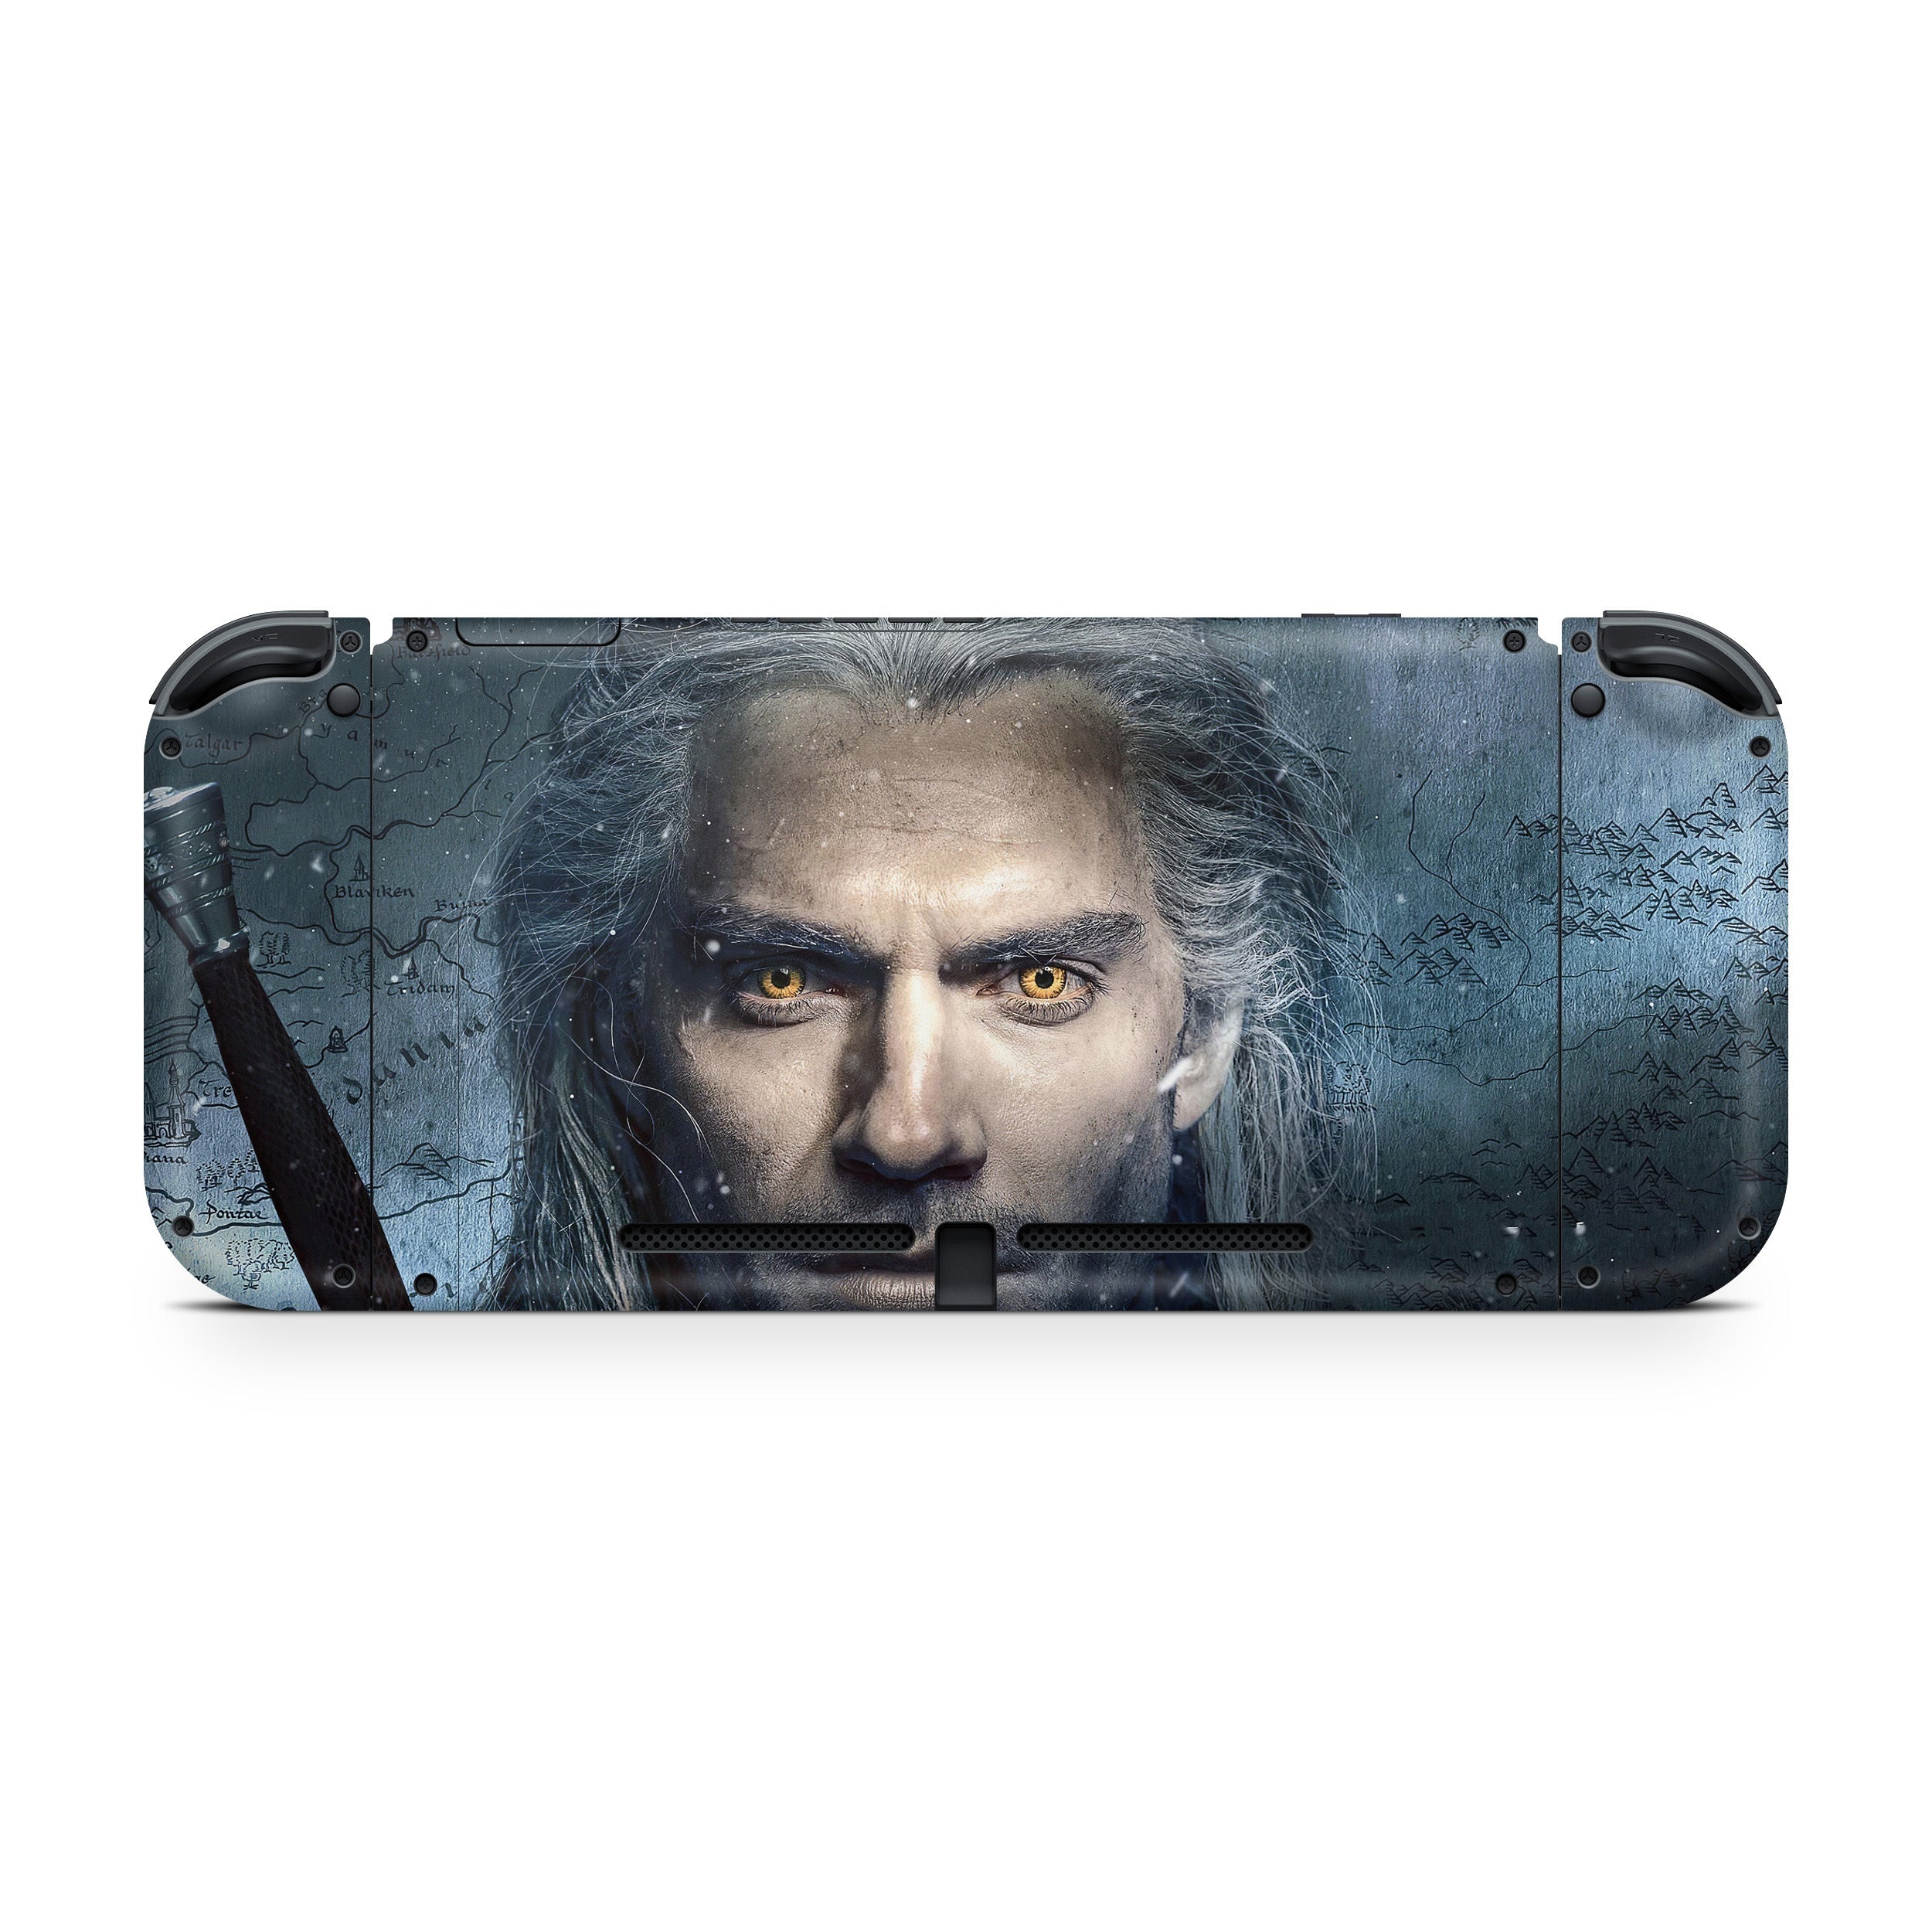 A video game skin featuring a The Witcher design for the Nintendo Switch.